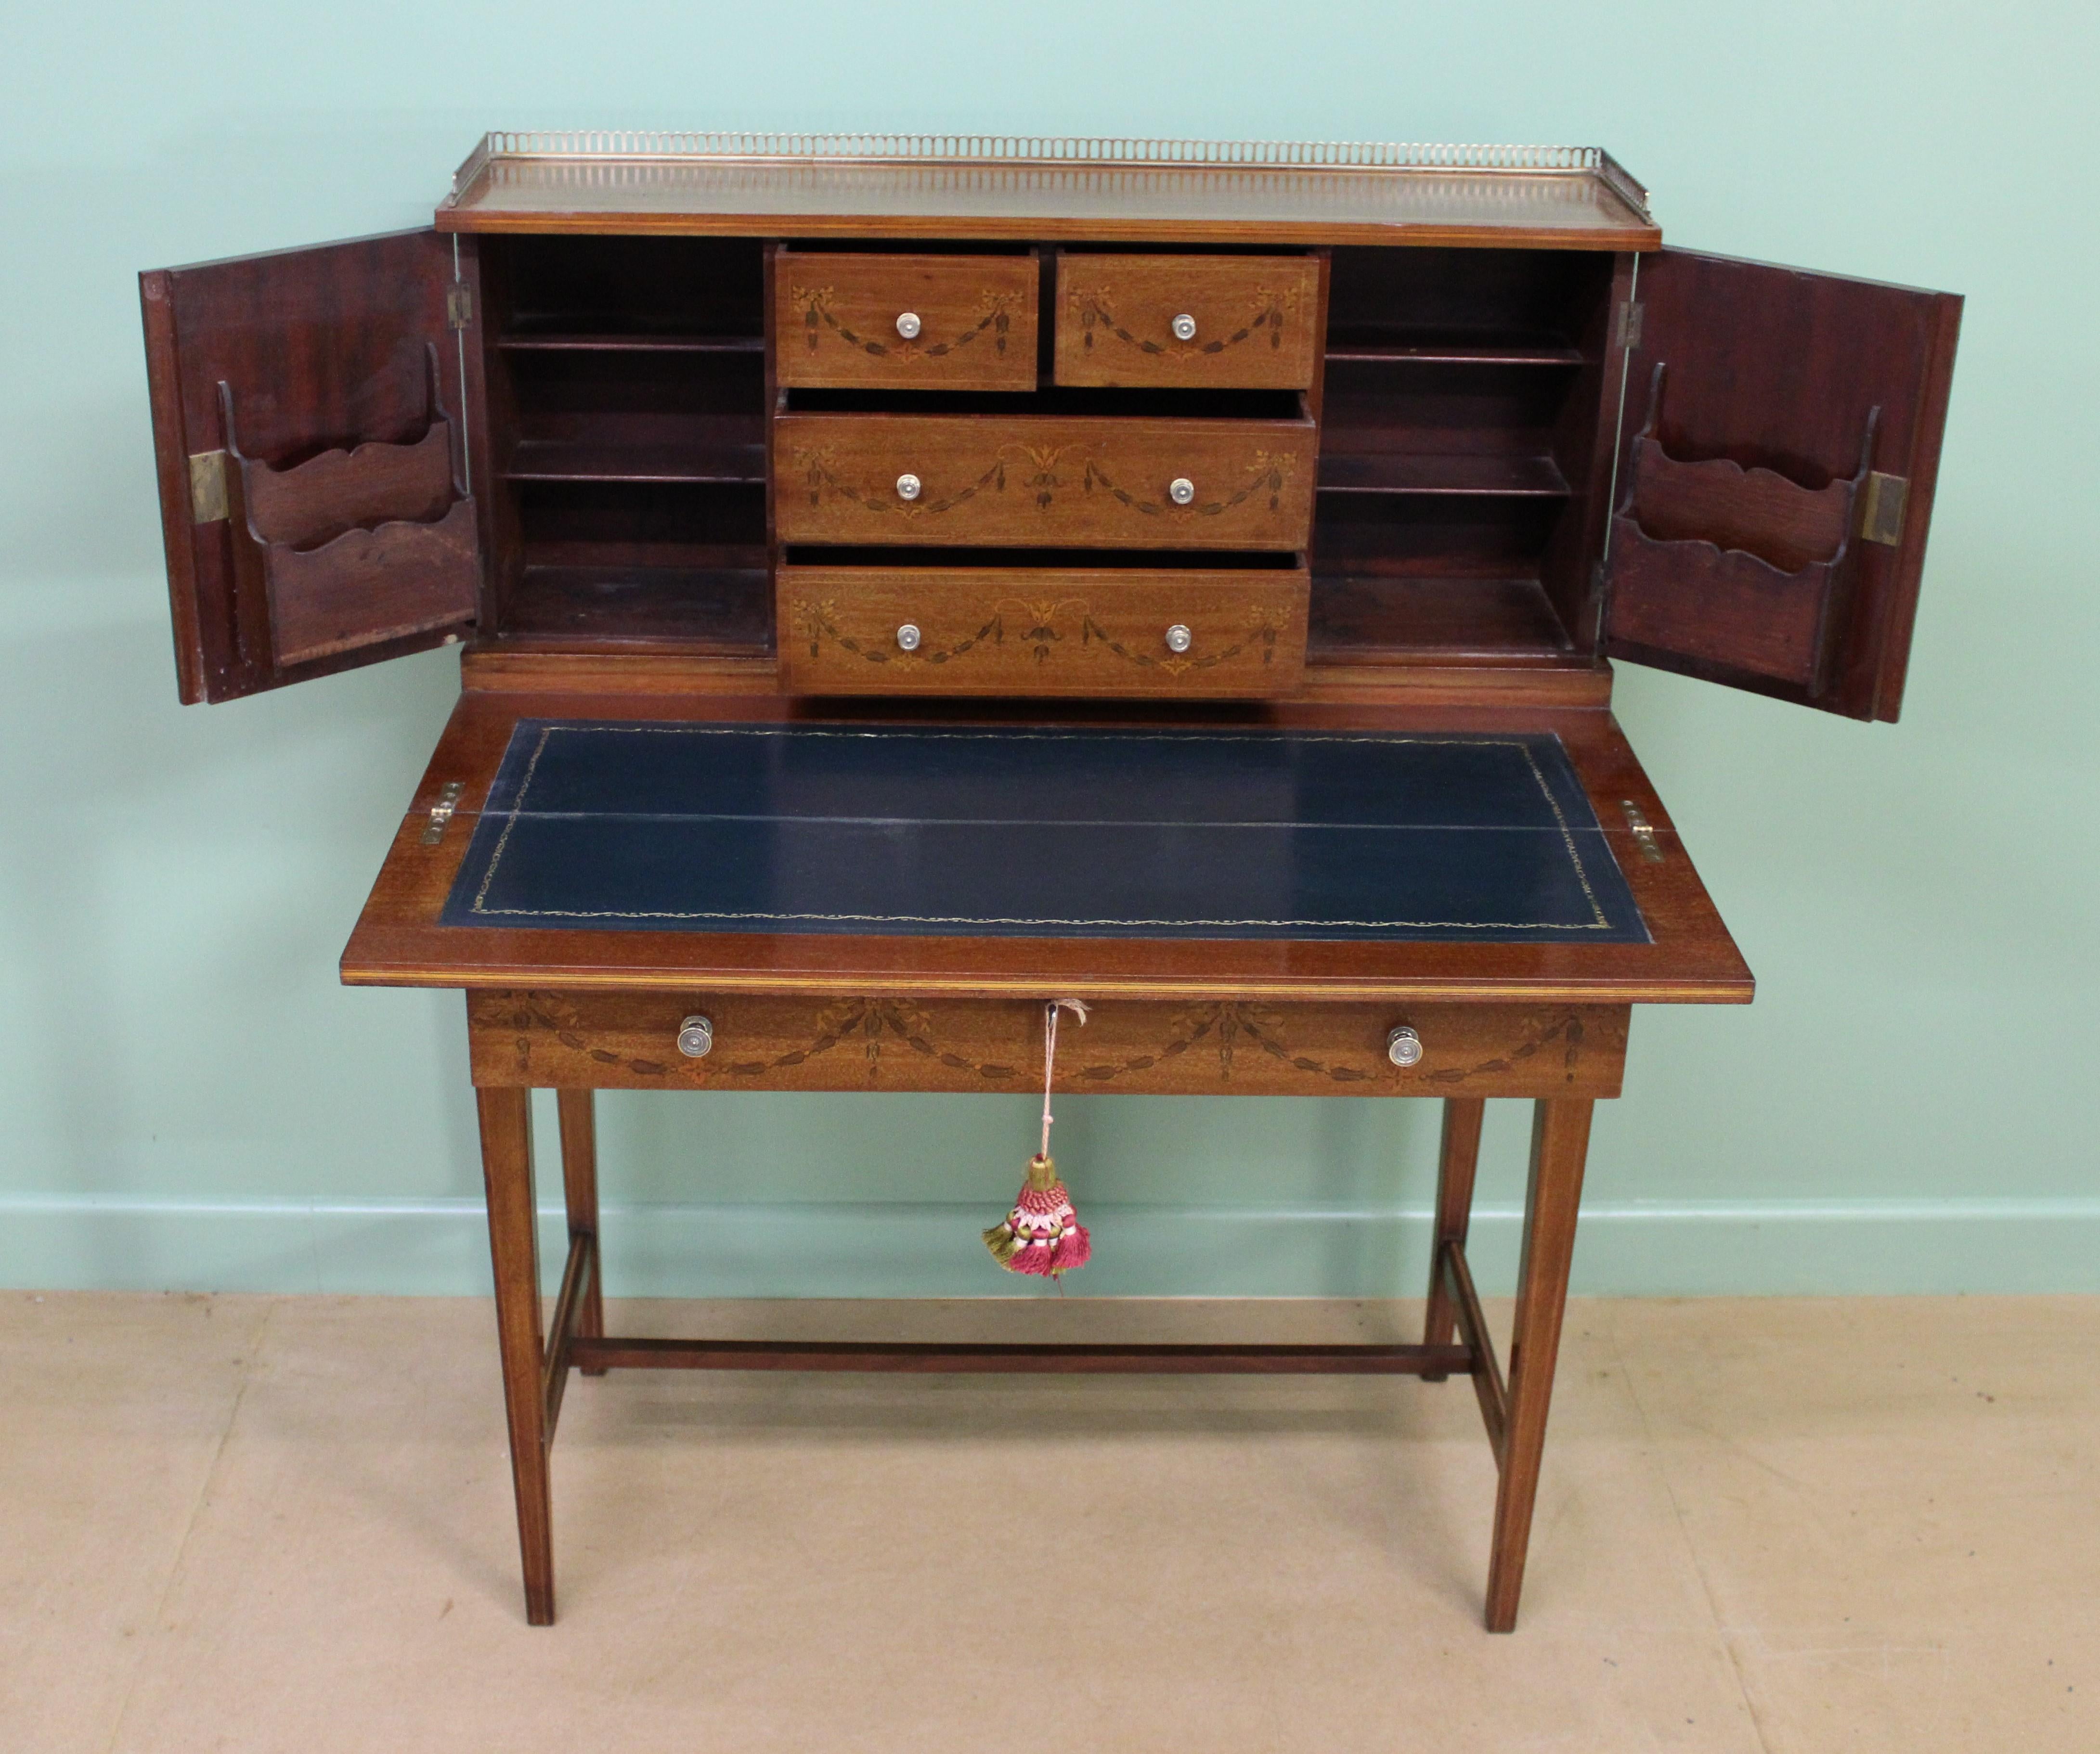 Late 19th Century Inlaid Mahogany Bonheur Du Jour by Jas Shoolbred & Co. For Sale 6